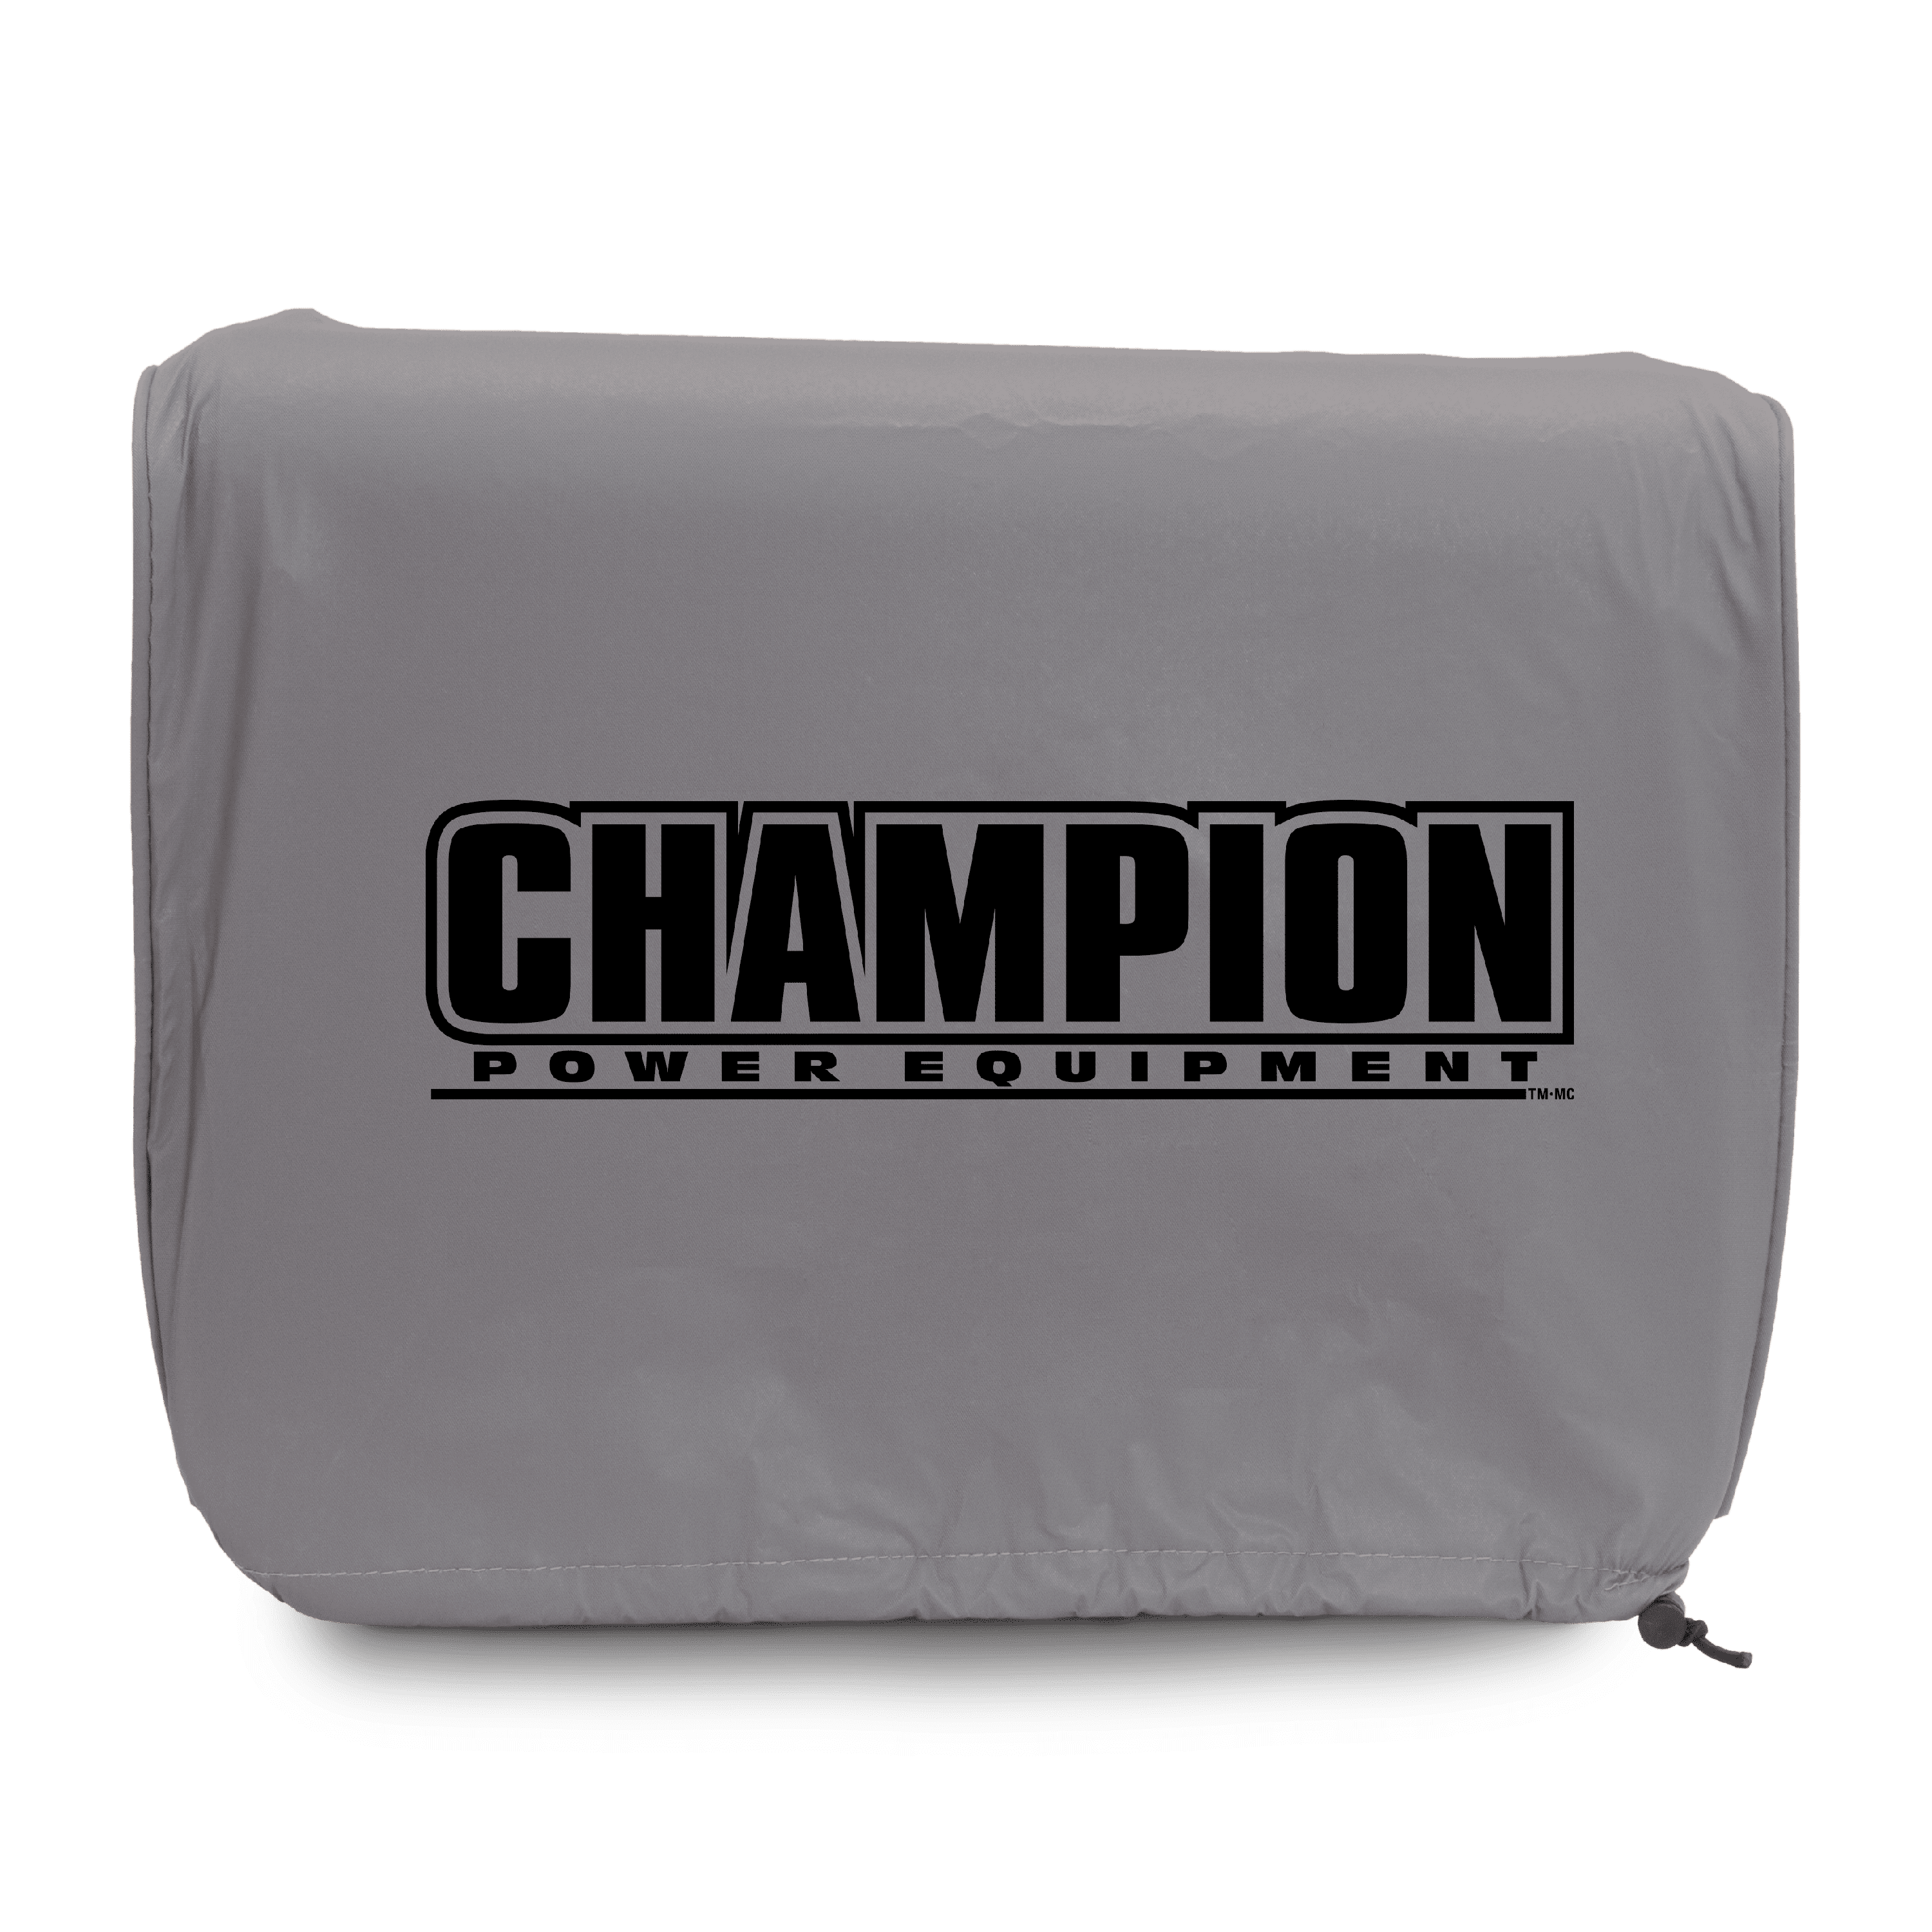 For Honda Power Equipment Storage Outdoor Silver Storage Cover Durable Fabric 